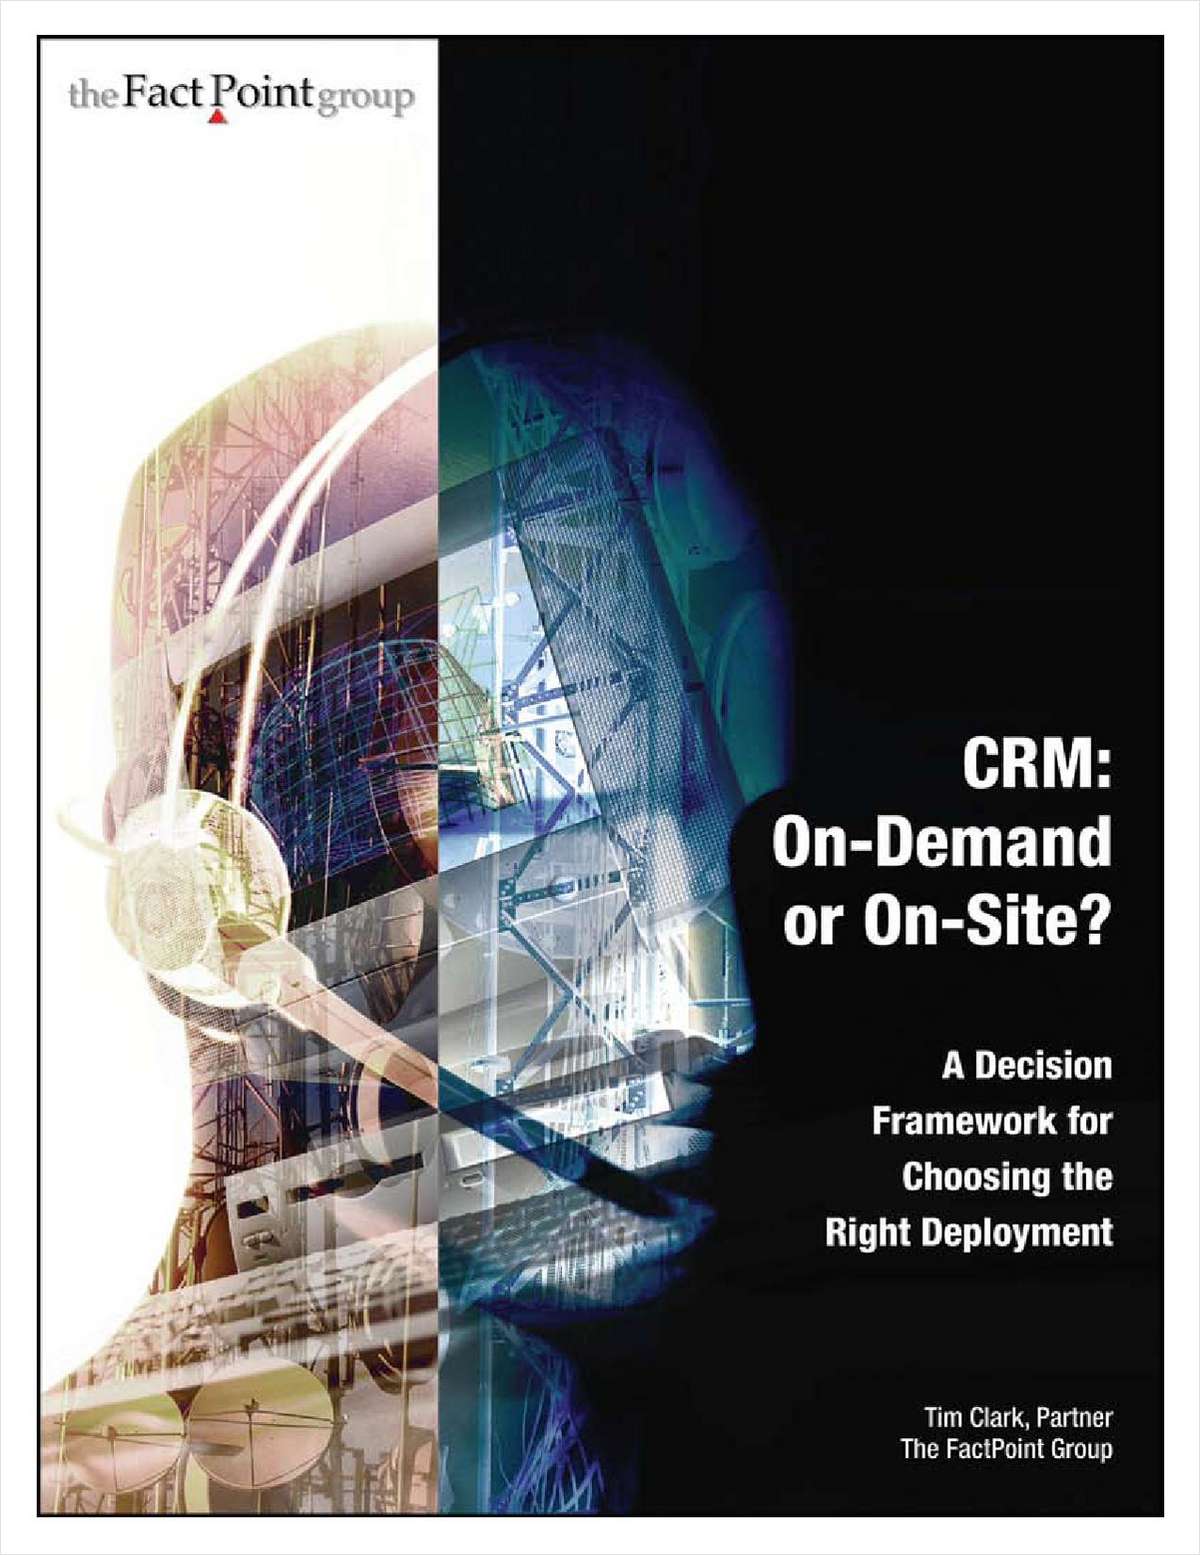 CRM On-Site or On-Demand? Choose the right deployment option